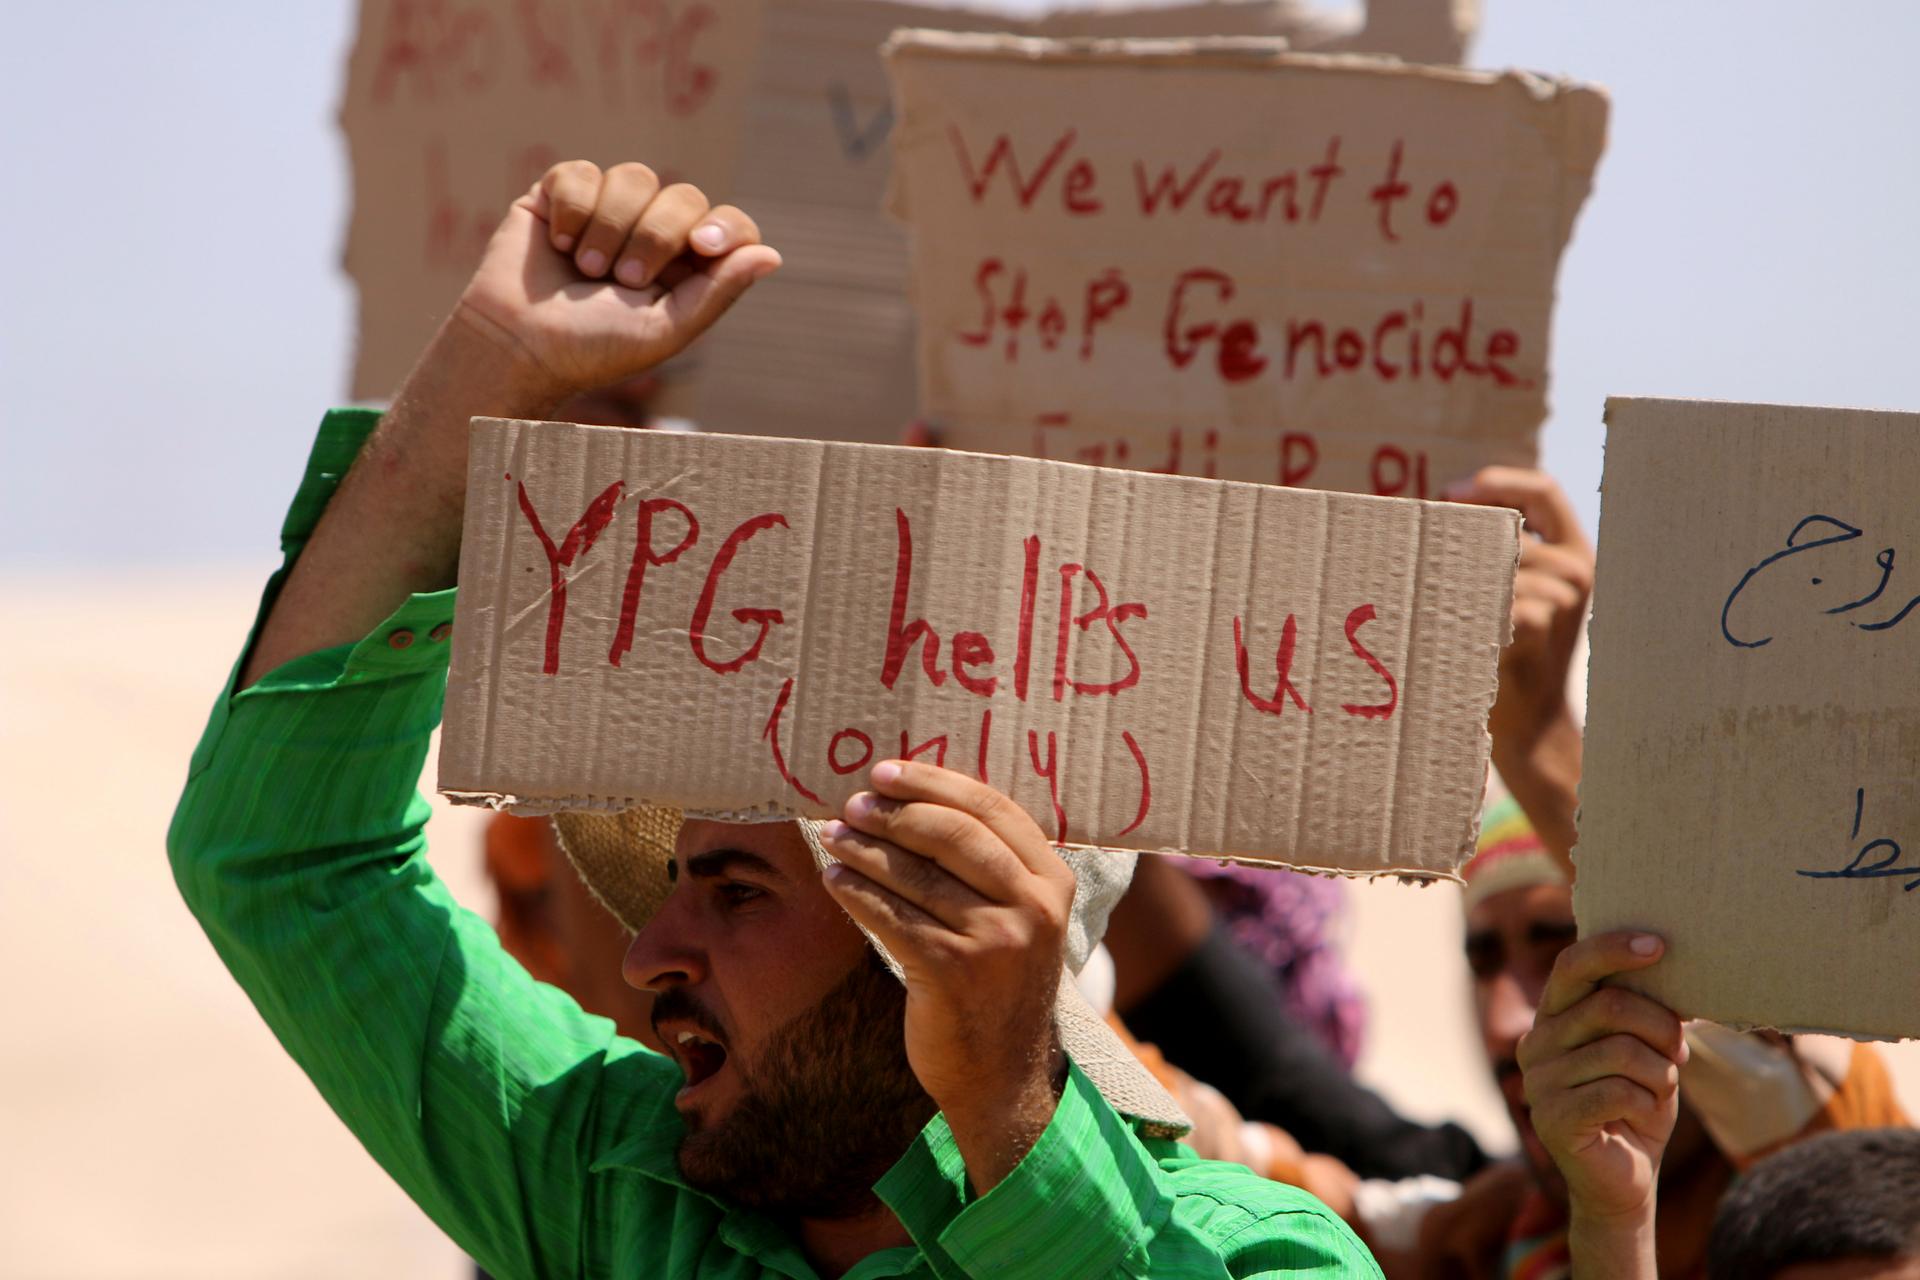 A refugee from the minority Yazidi sect carries a sign referring to the Kurdish People's Defence Units in Qamishli, northeastern Syria on August 17, 2014. Yazidis and Assyrians are two of the minority sects under assault from ISIS.